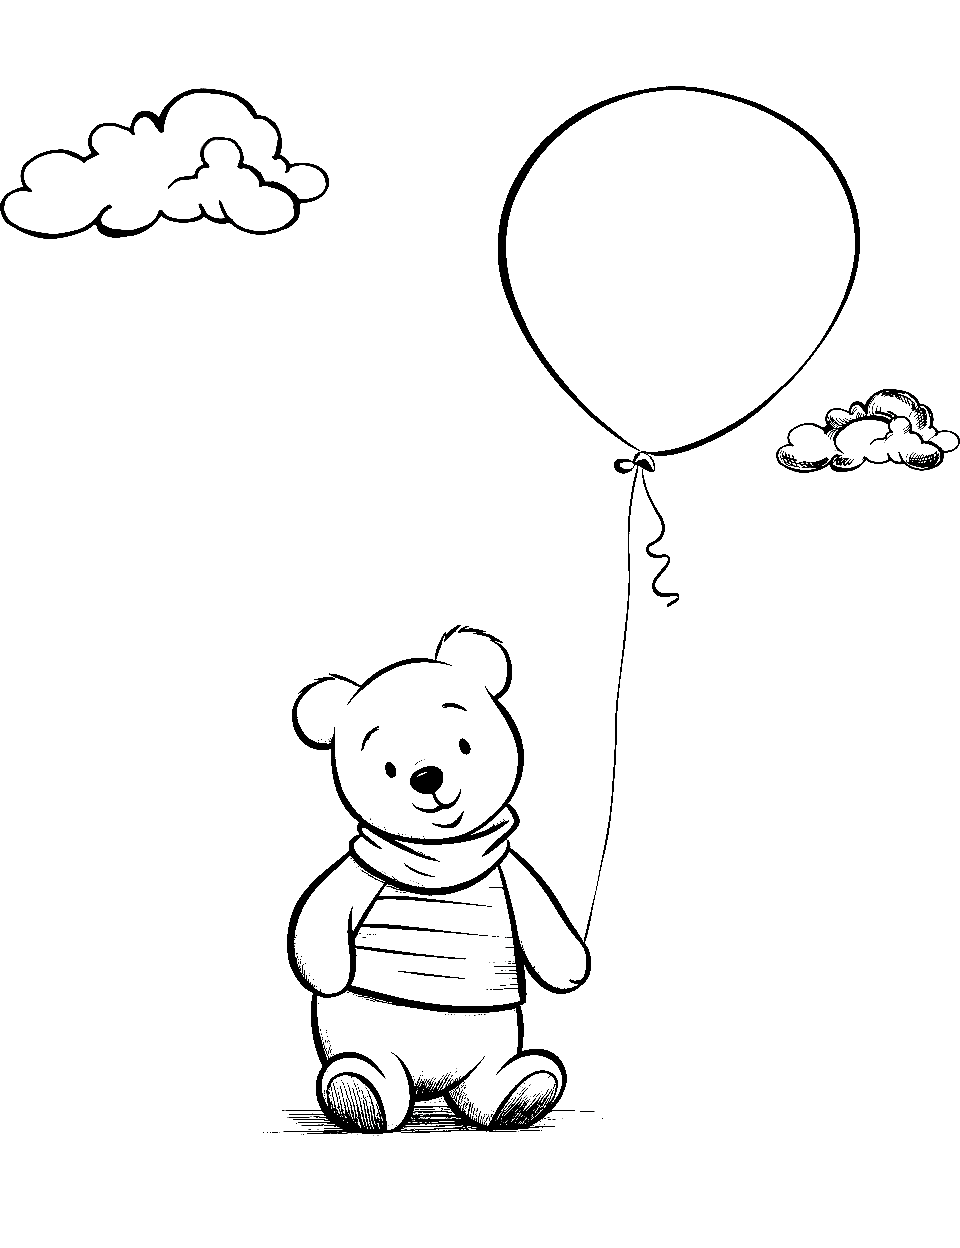 Balloon and Pooh Coloring Page - Pooh Bear holding a ballon ready to go on an adventure.